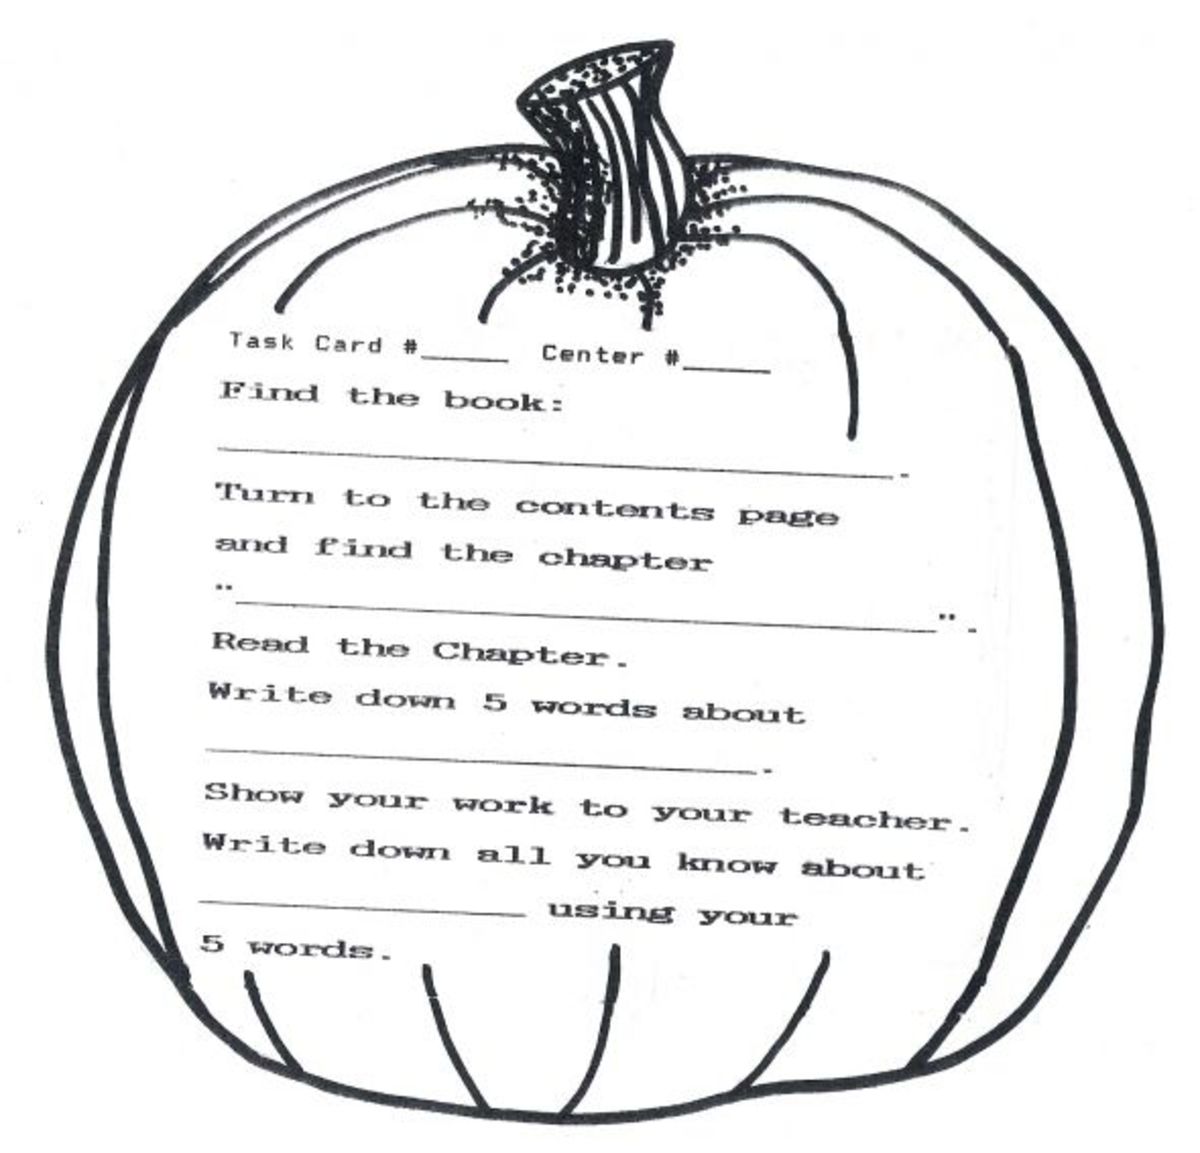 Pumpkin picking time thematic unit for home school or classroom